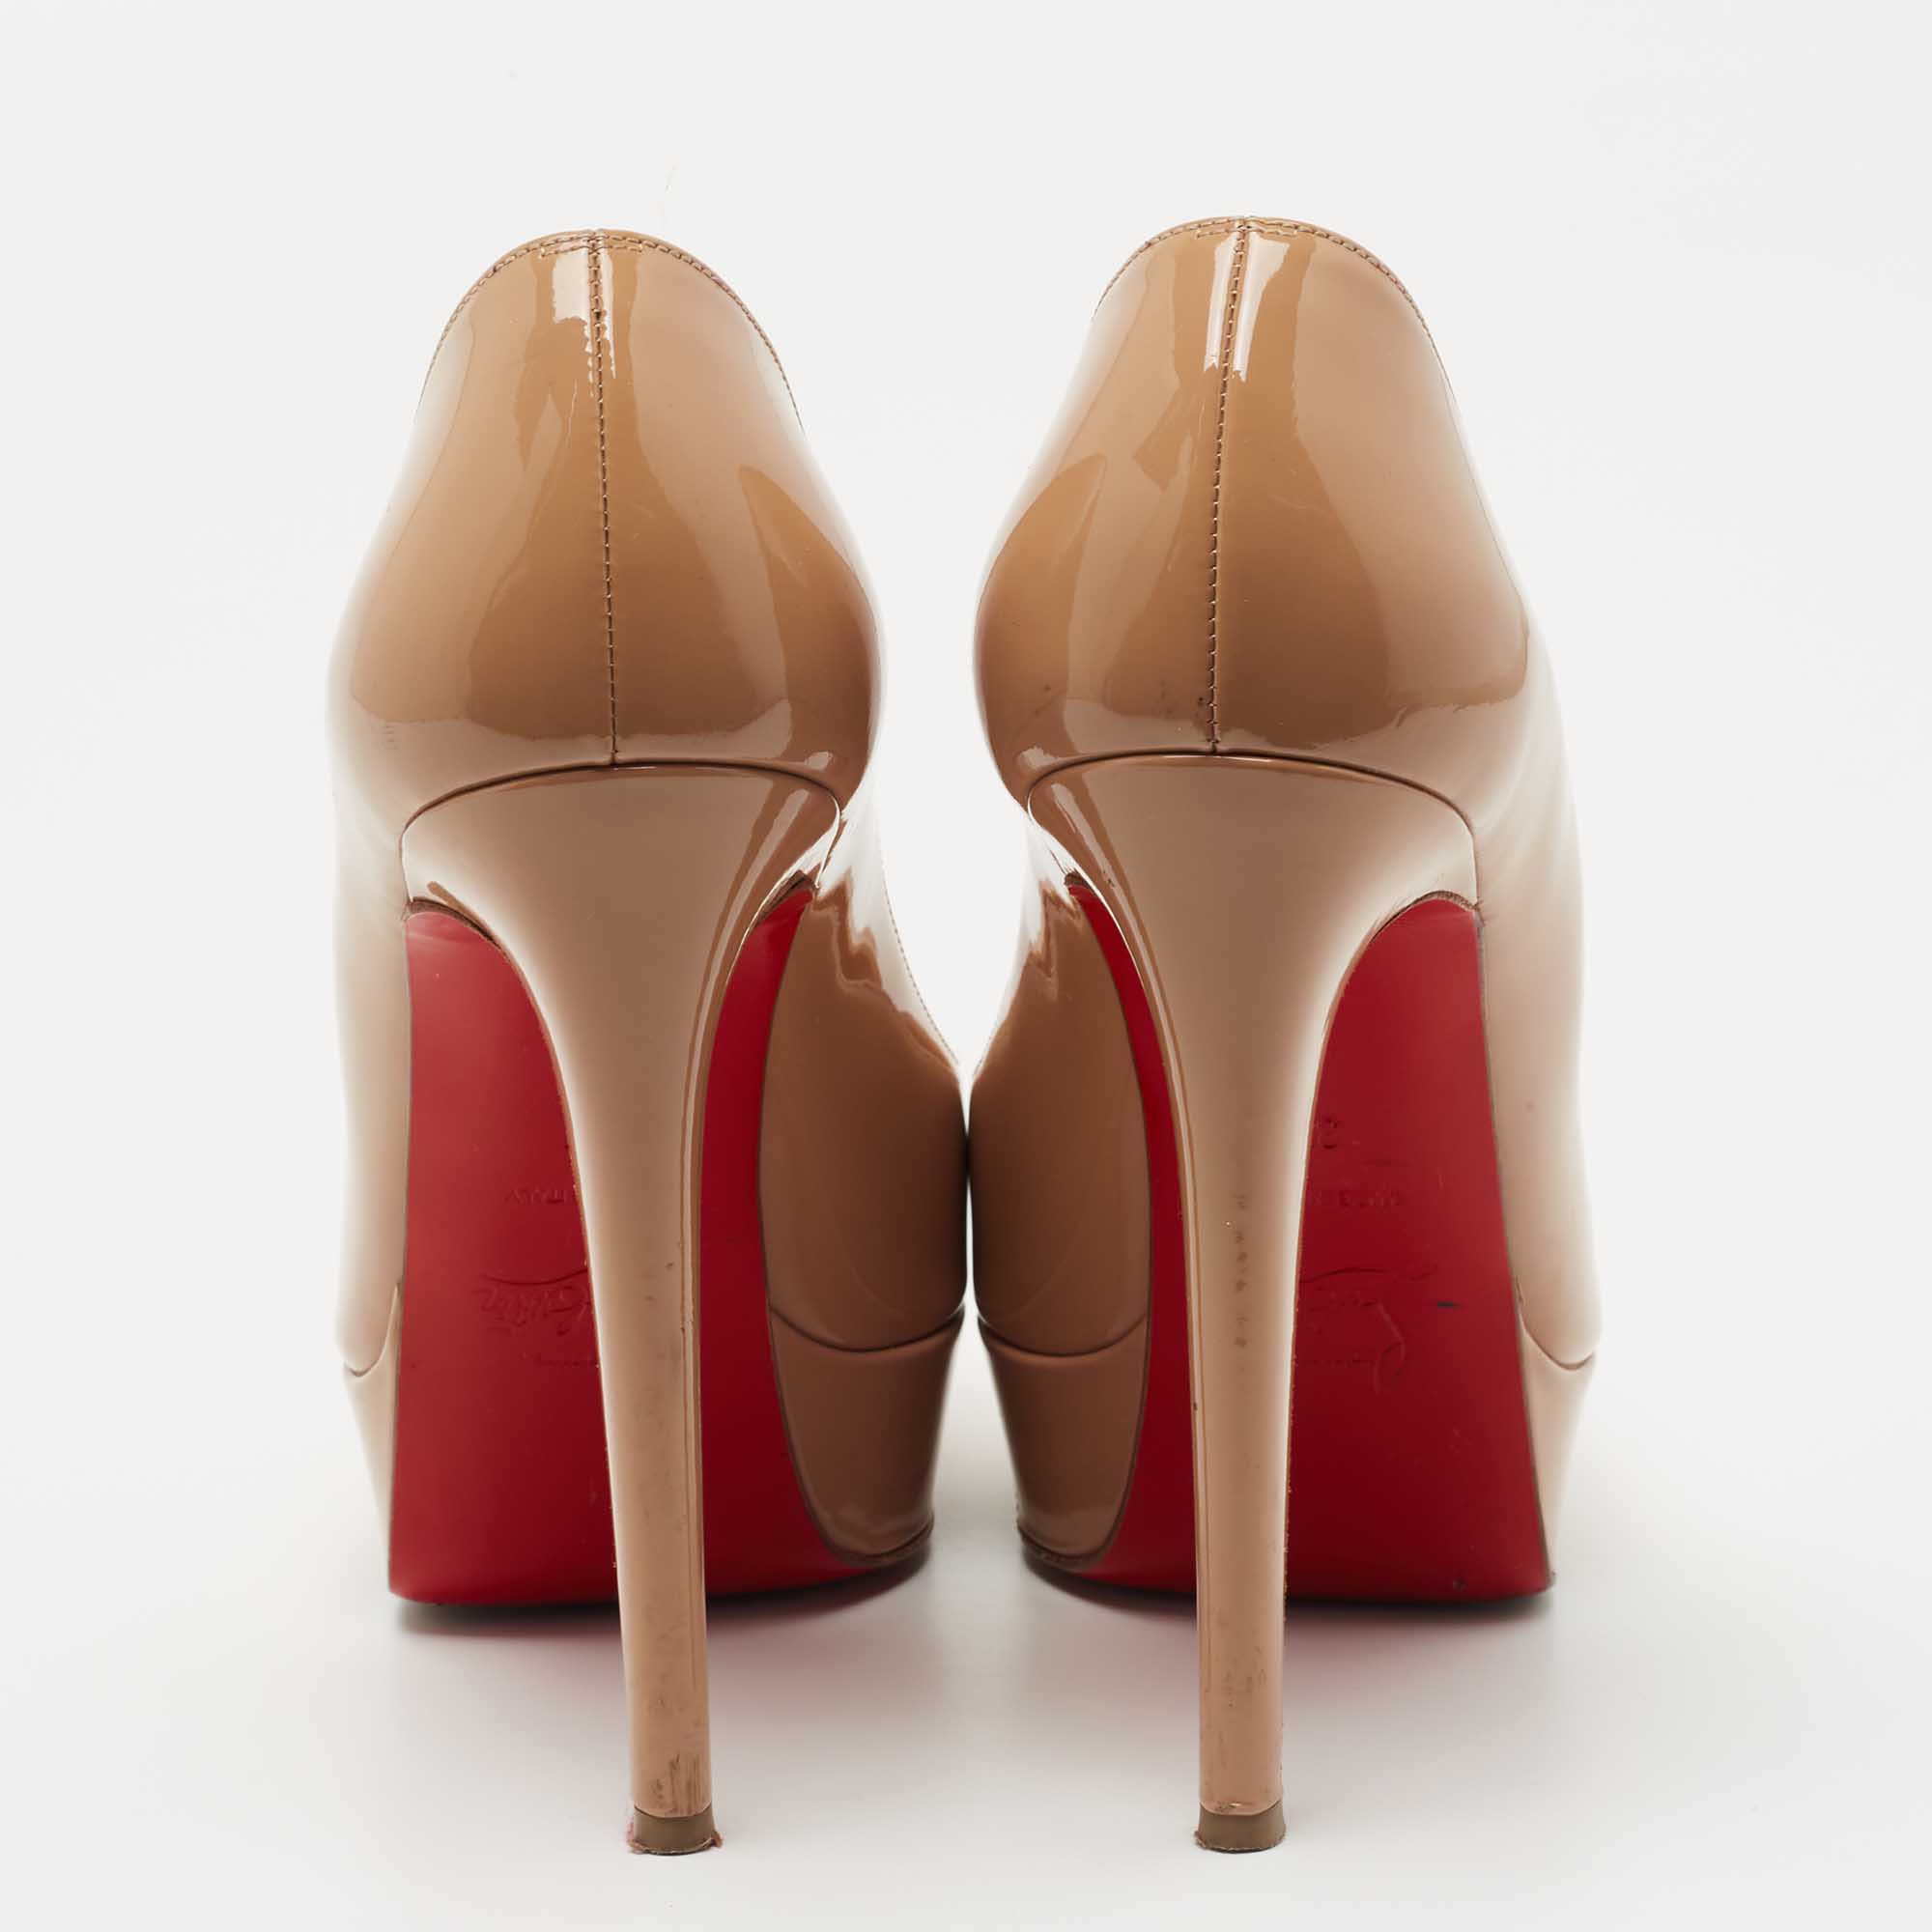 Christian Louboutin Beige Patent Leather Bianca Pumps Size 37